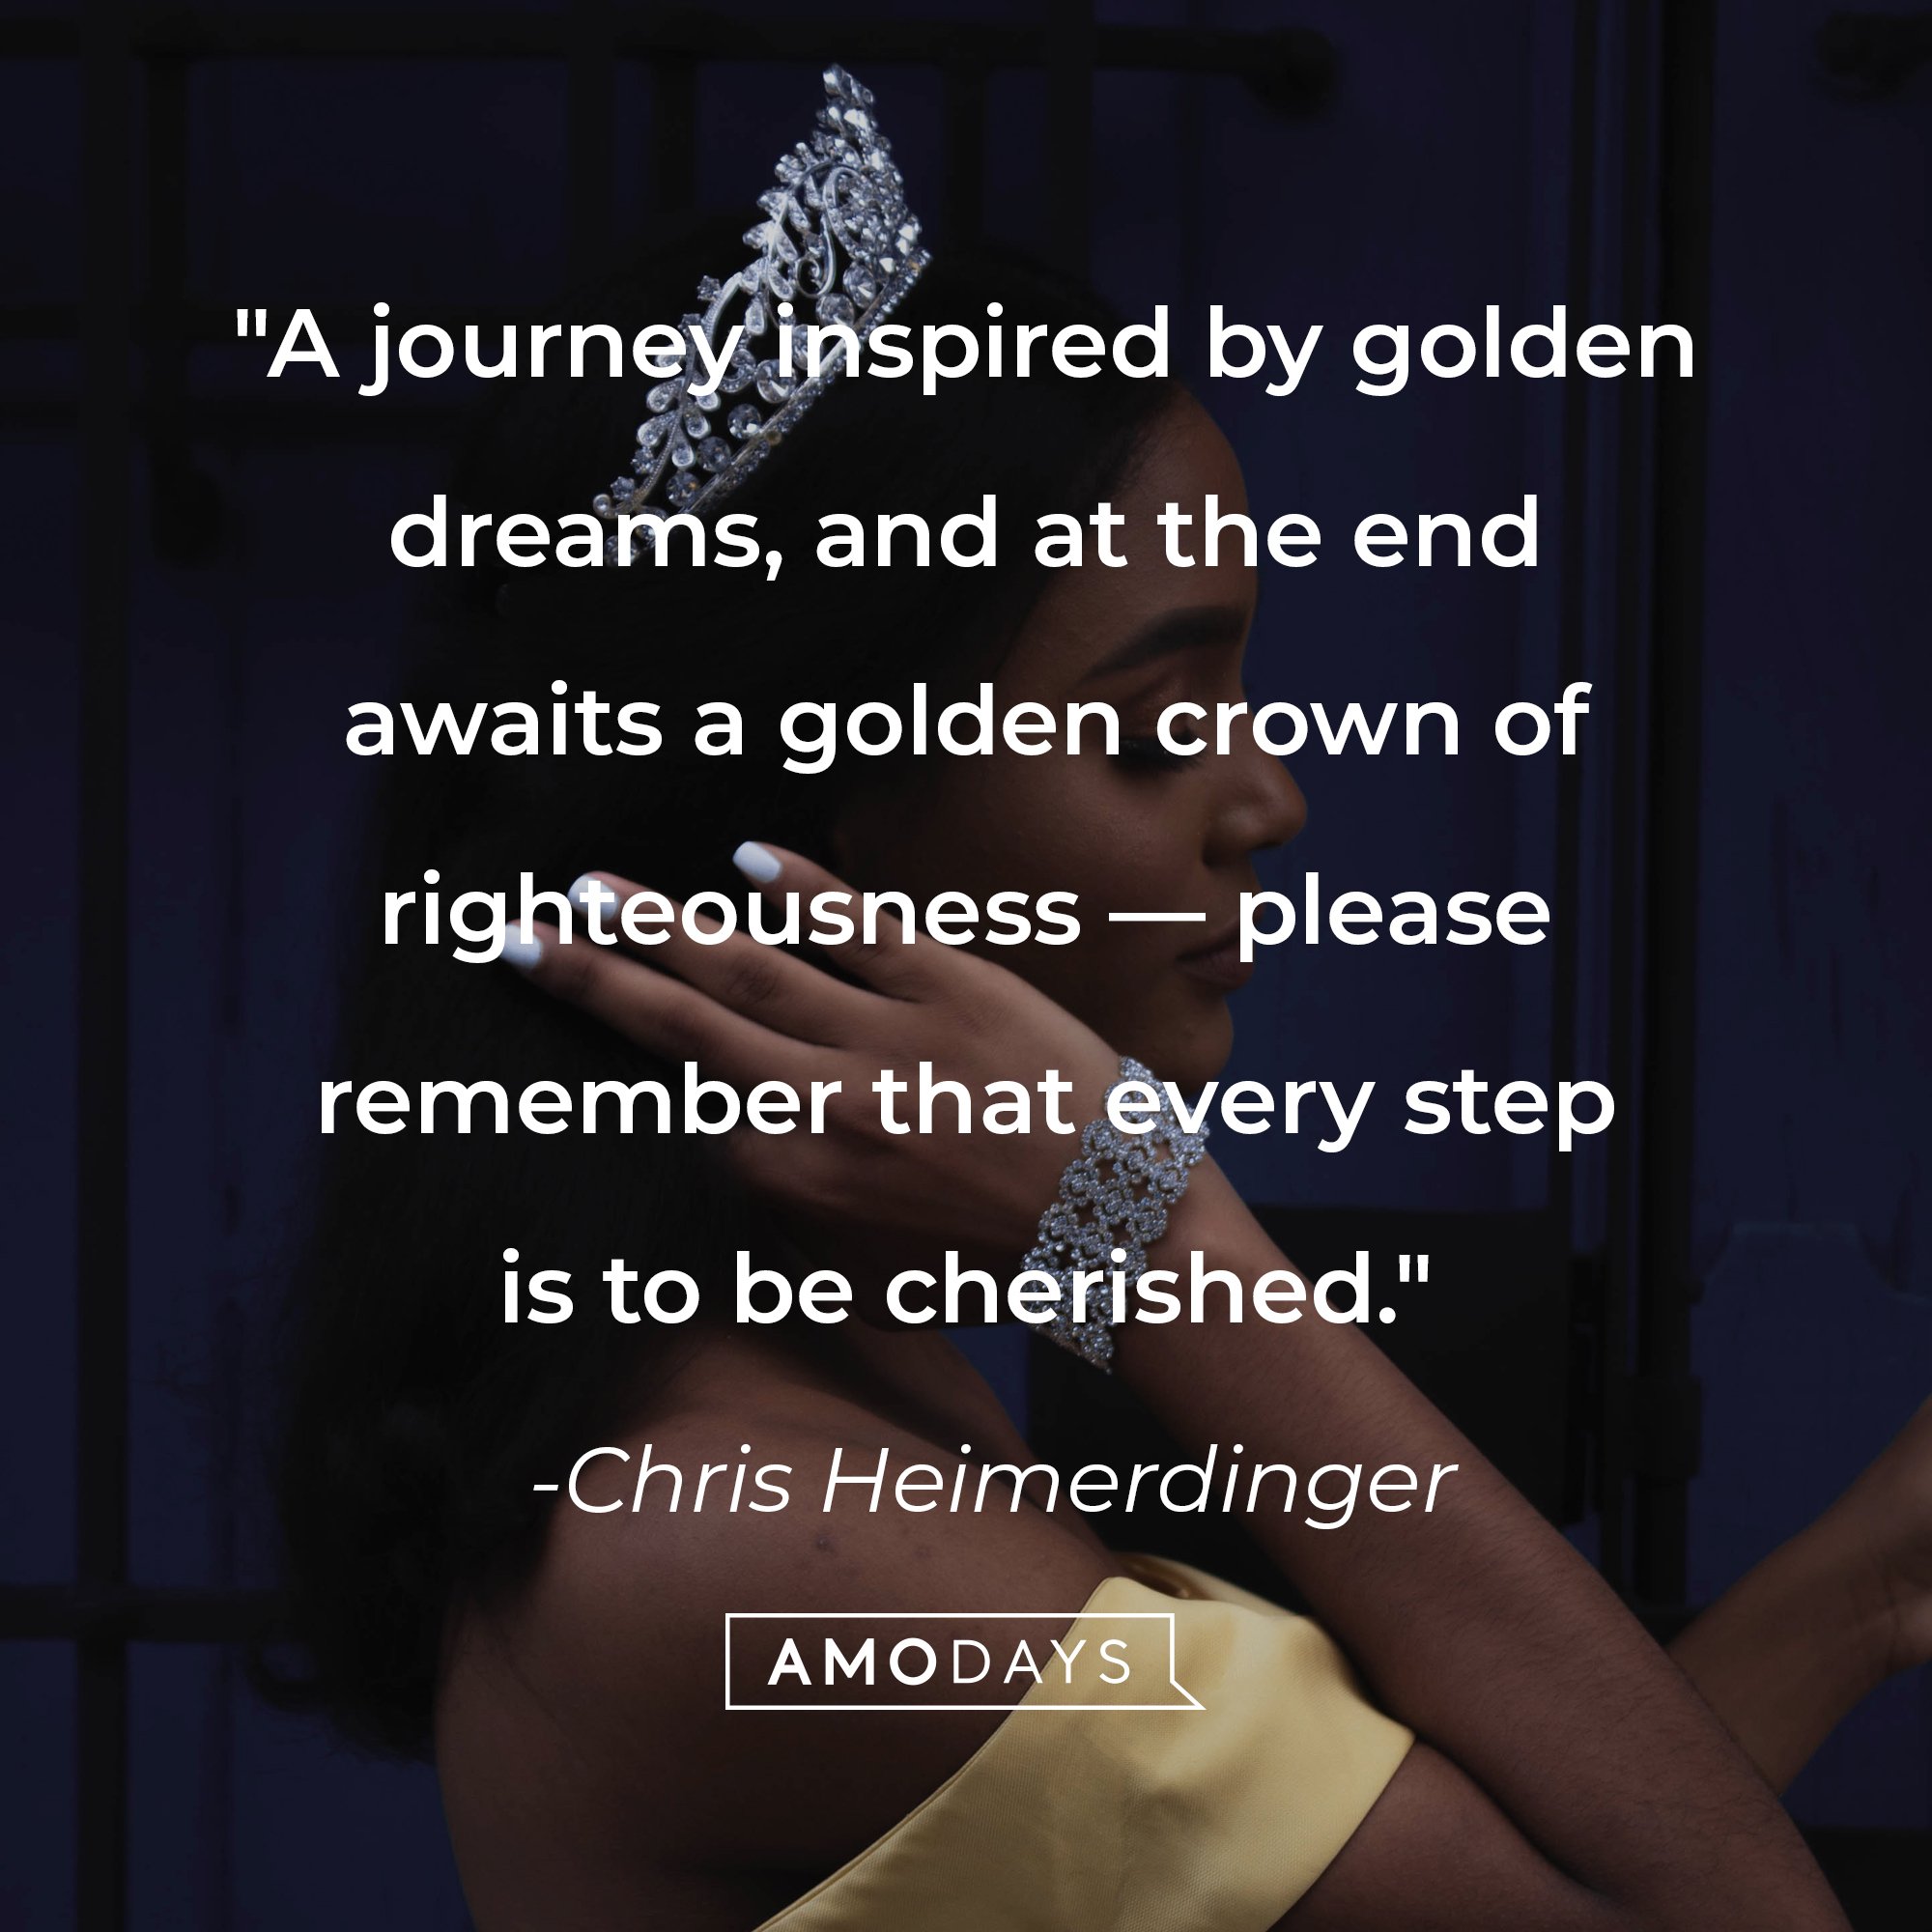 Chris Heimerdinger's quote: "A journey inspired by golden dreams, and at the end awaits a golden crown of righteousness—please remember that every step is to be cherished." | Image: AmoDays